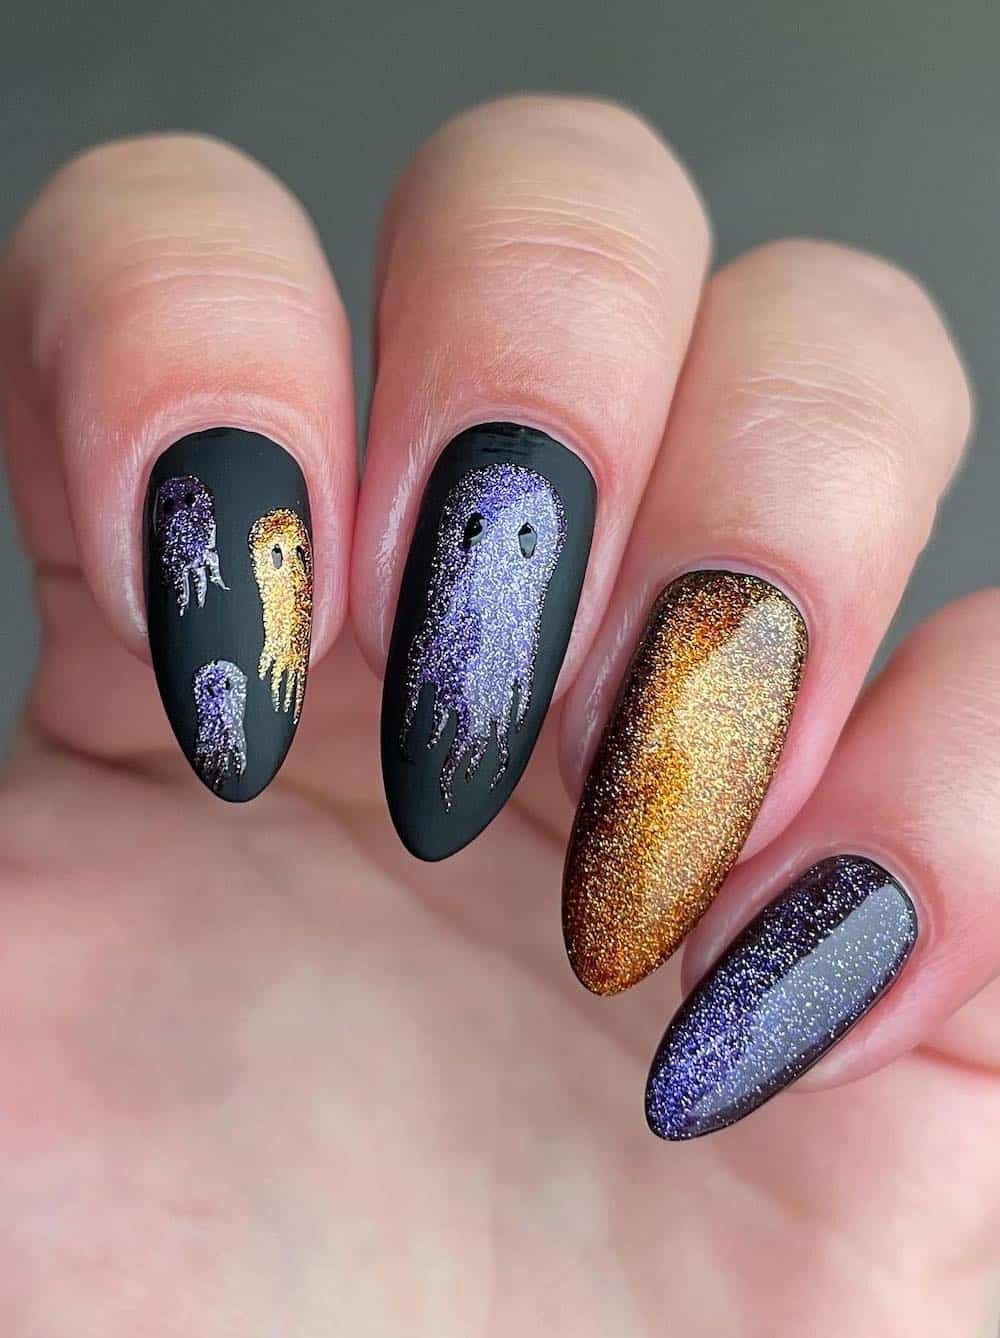 long glittering gold and purple polish on black almond nails featuring ghost nail art